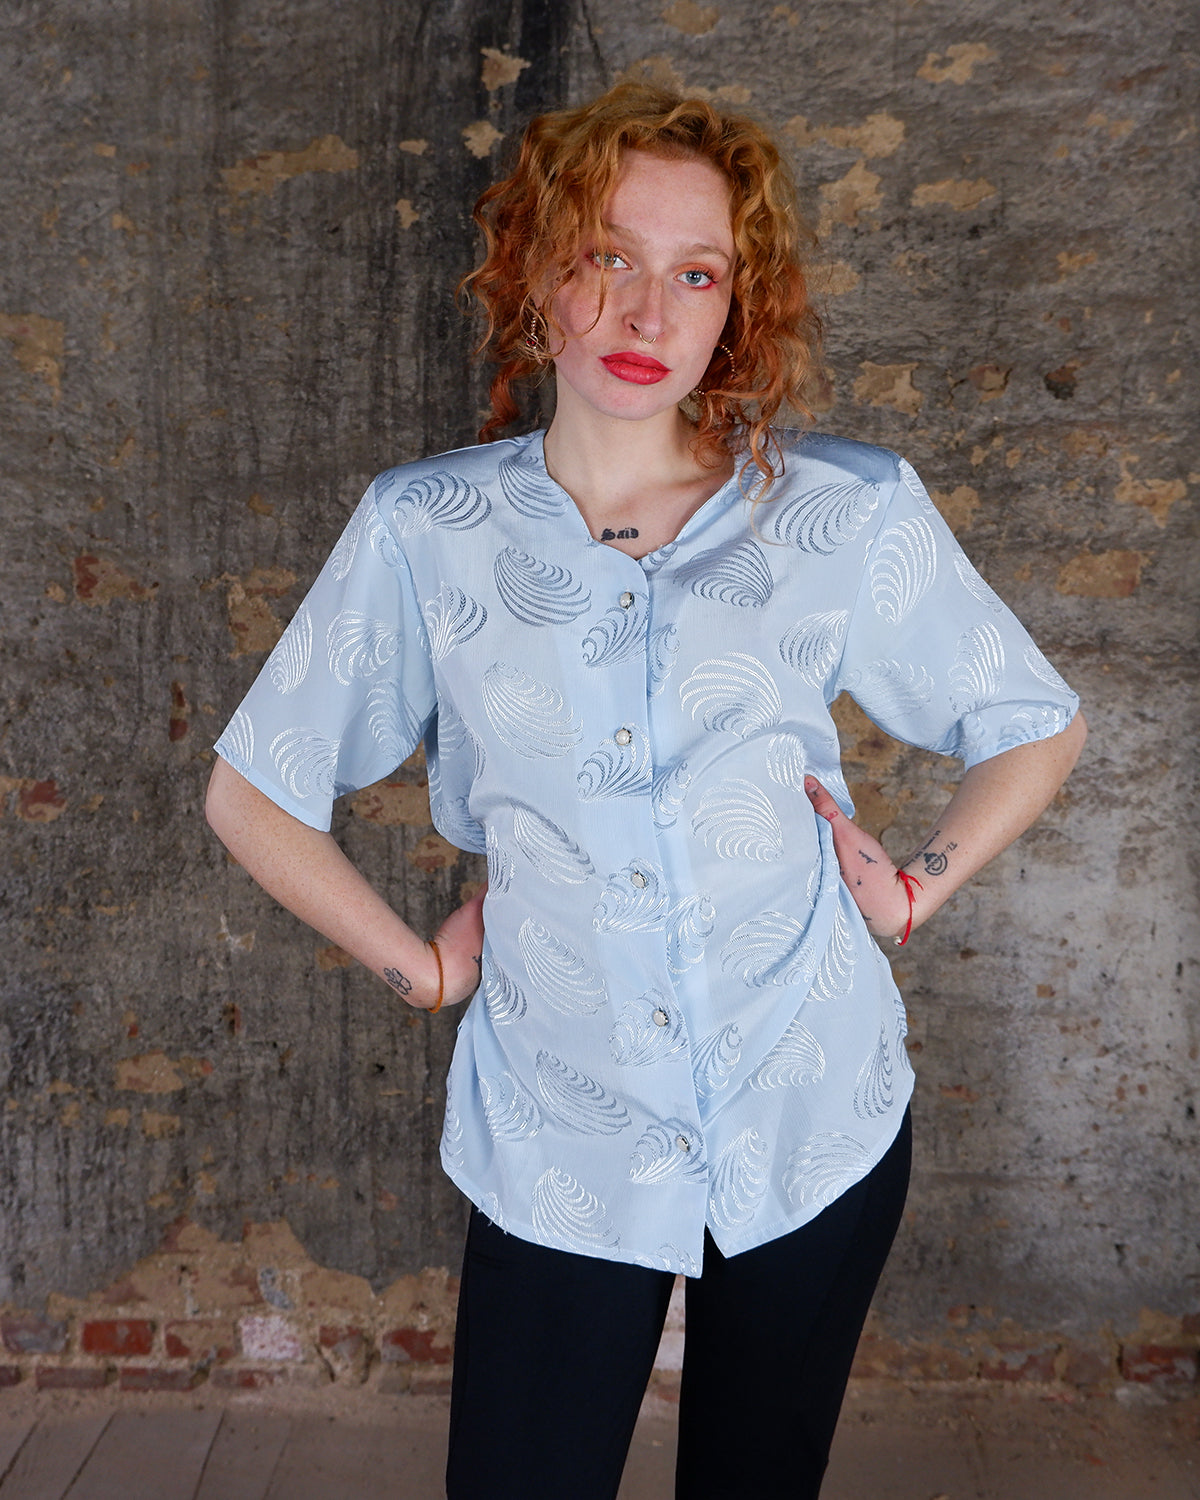 Introduce some sparkle to your style with this vintage 80s light blue blouse. The flattering fit, courtesy of the short sleeves and shoulder pads, meets a playful touch of shimmering pattern. Sparkle on!